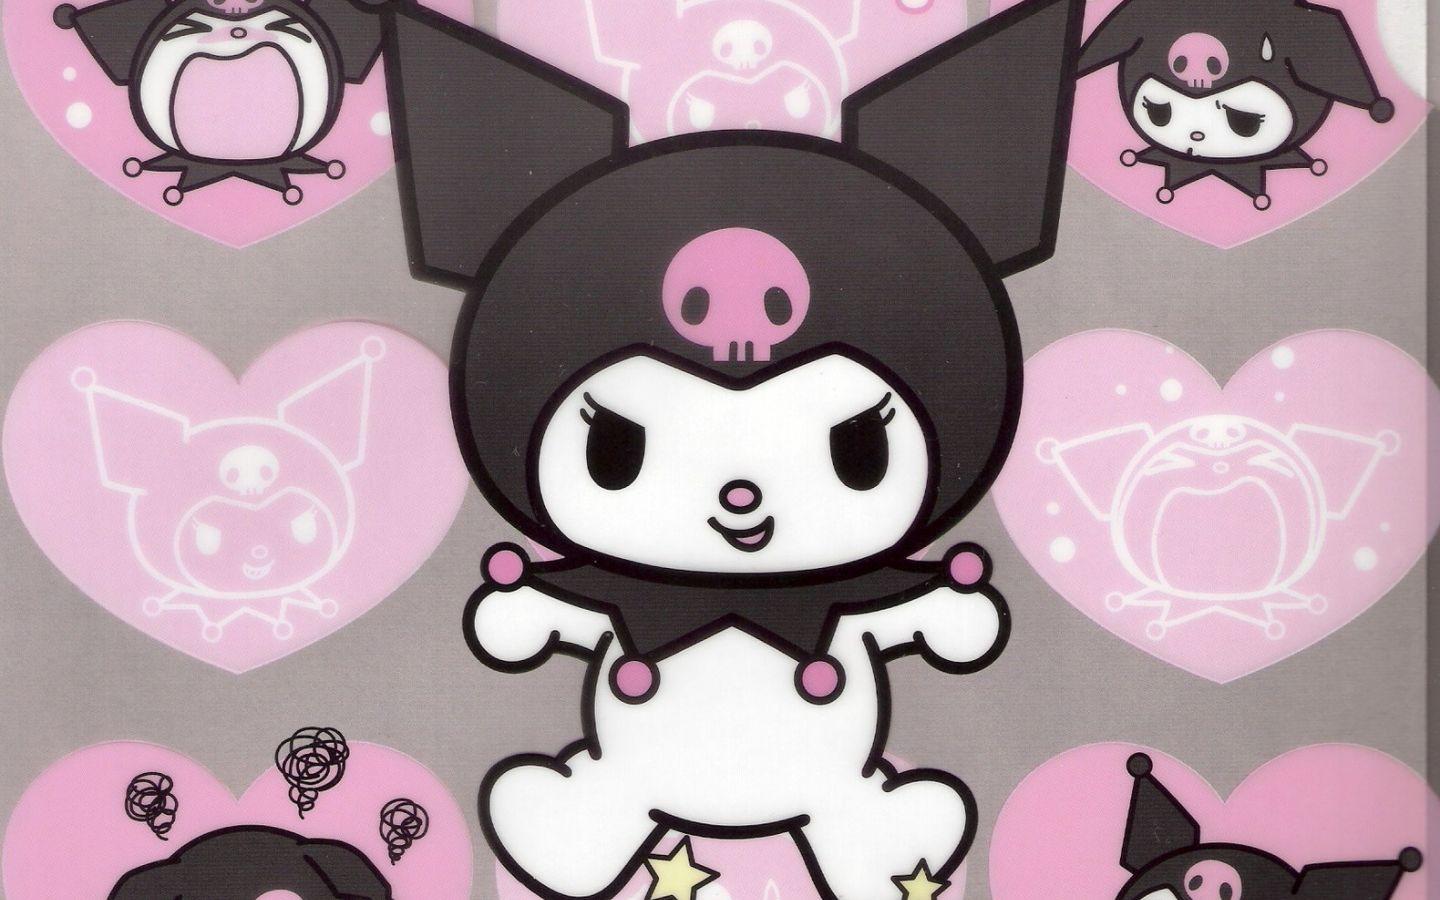 Enwallpaper  Kuromi Wallpaper Download httpswwwenwallpapercomkuromiwallpaper3  Kuromi Wallpaper Free Full HD Download use for mobile and desktop  Discover more Aesthetic Character Cute Hello Kitty Kuromi Wallpapers   Facebook